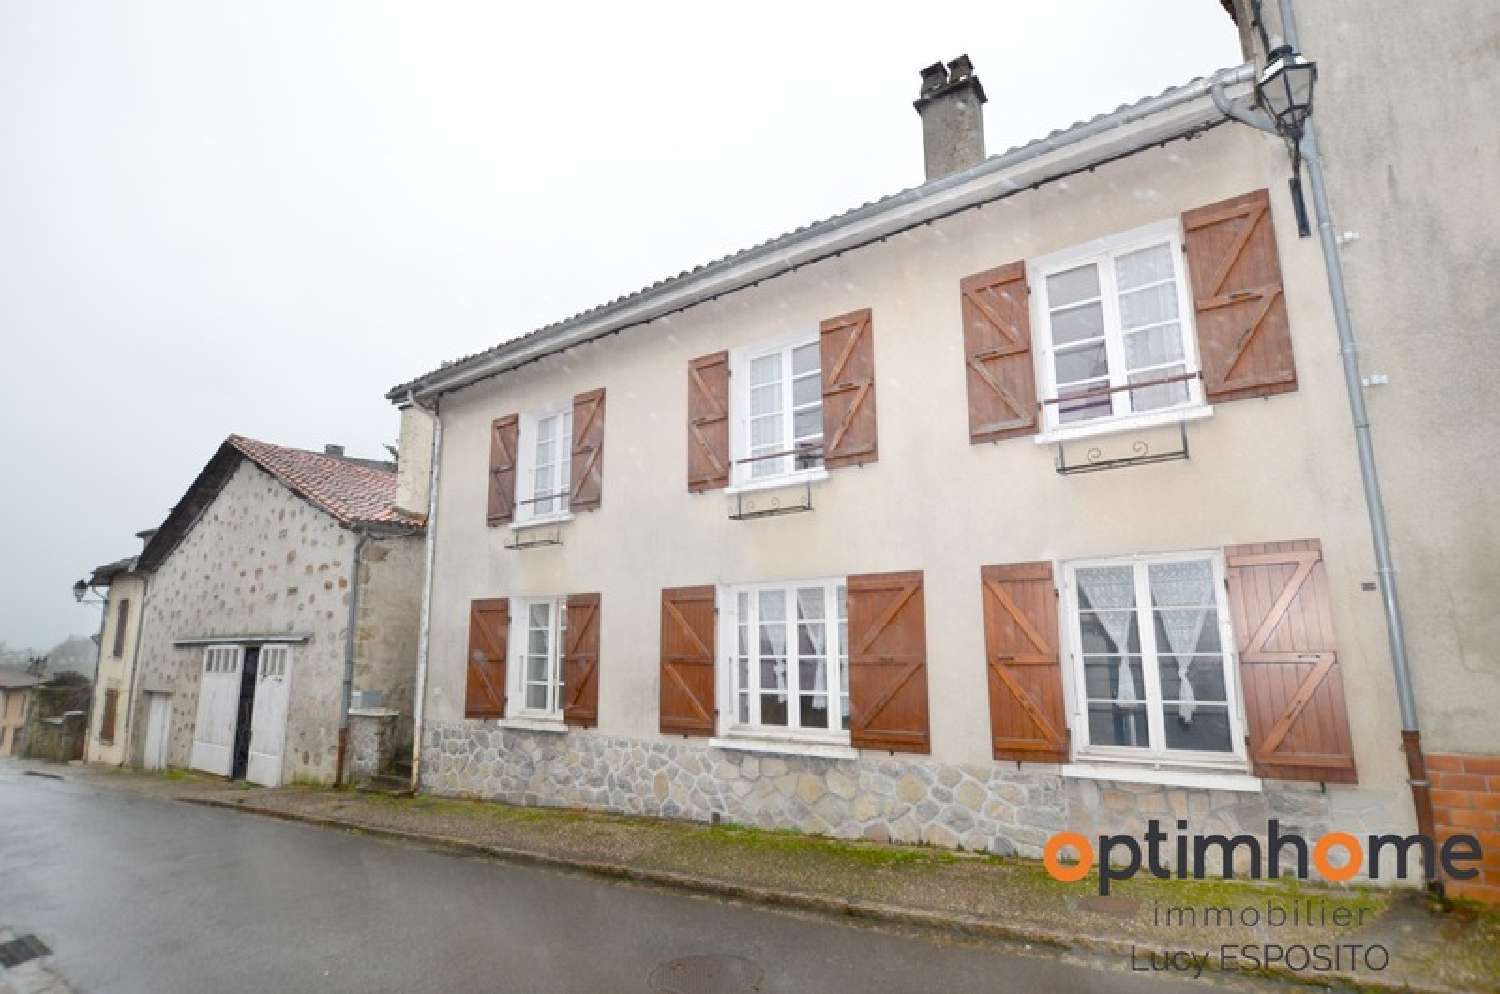  for sale village house Brigueuil Charente 1